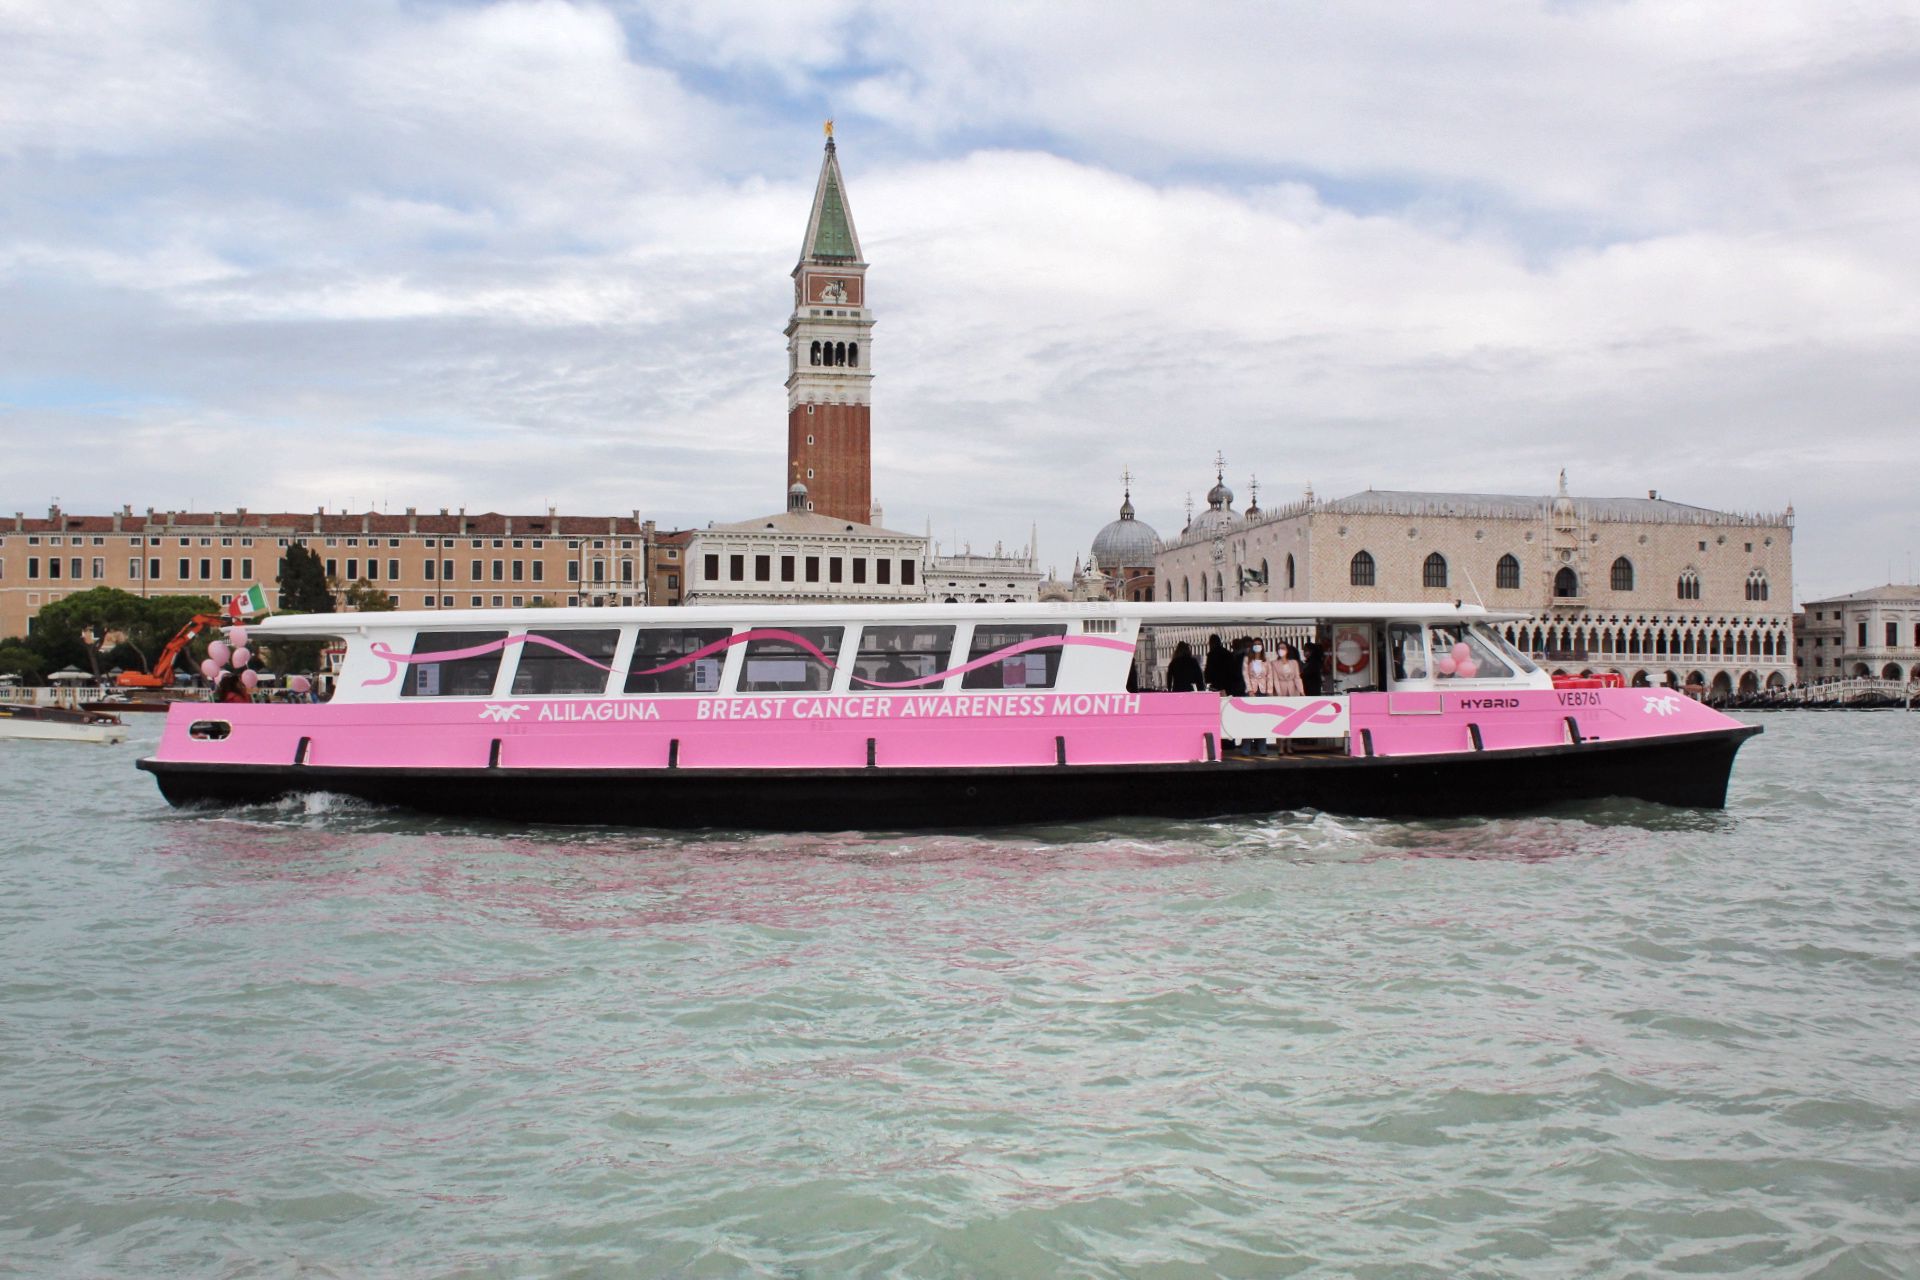 Venice is pink